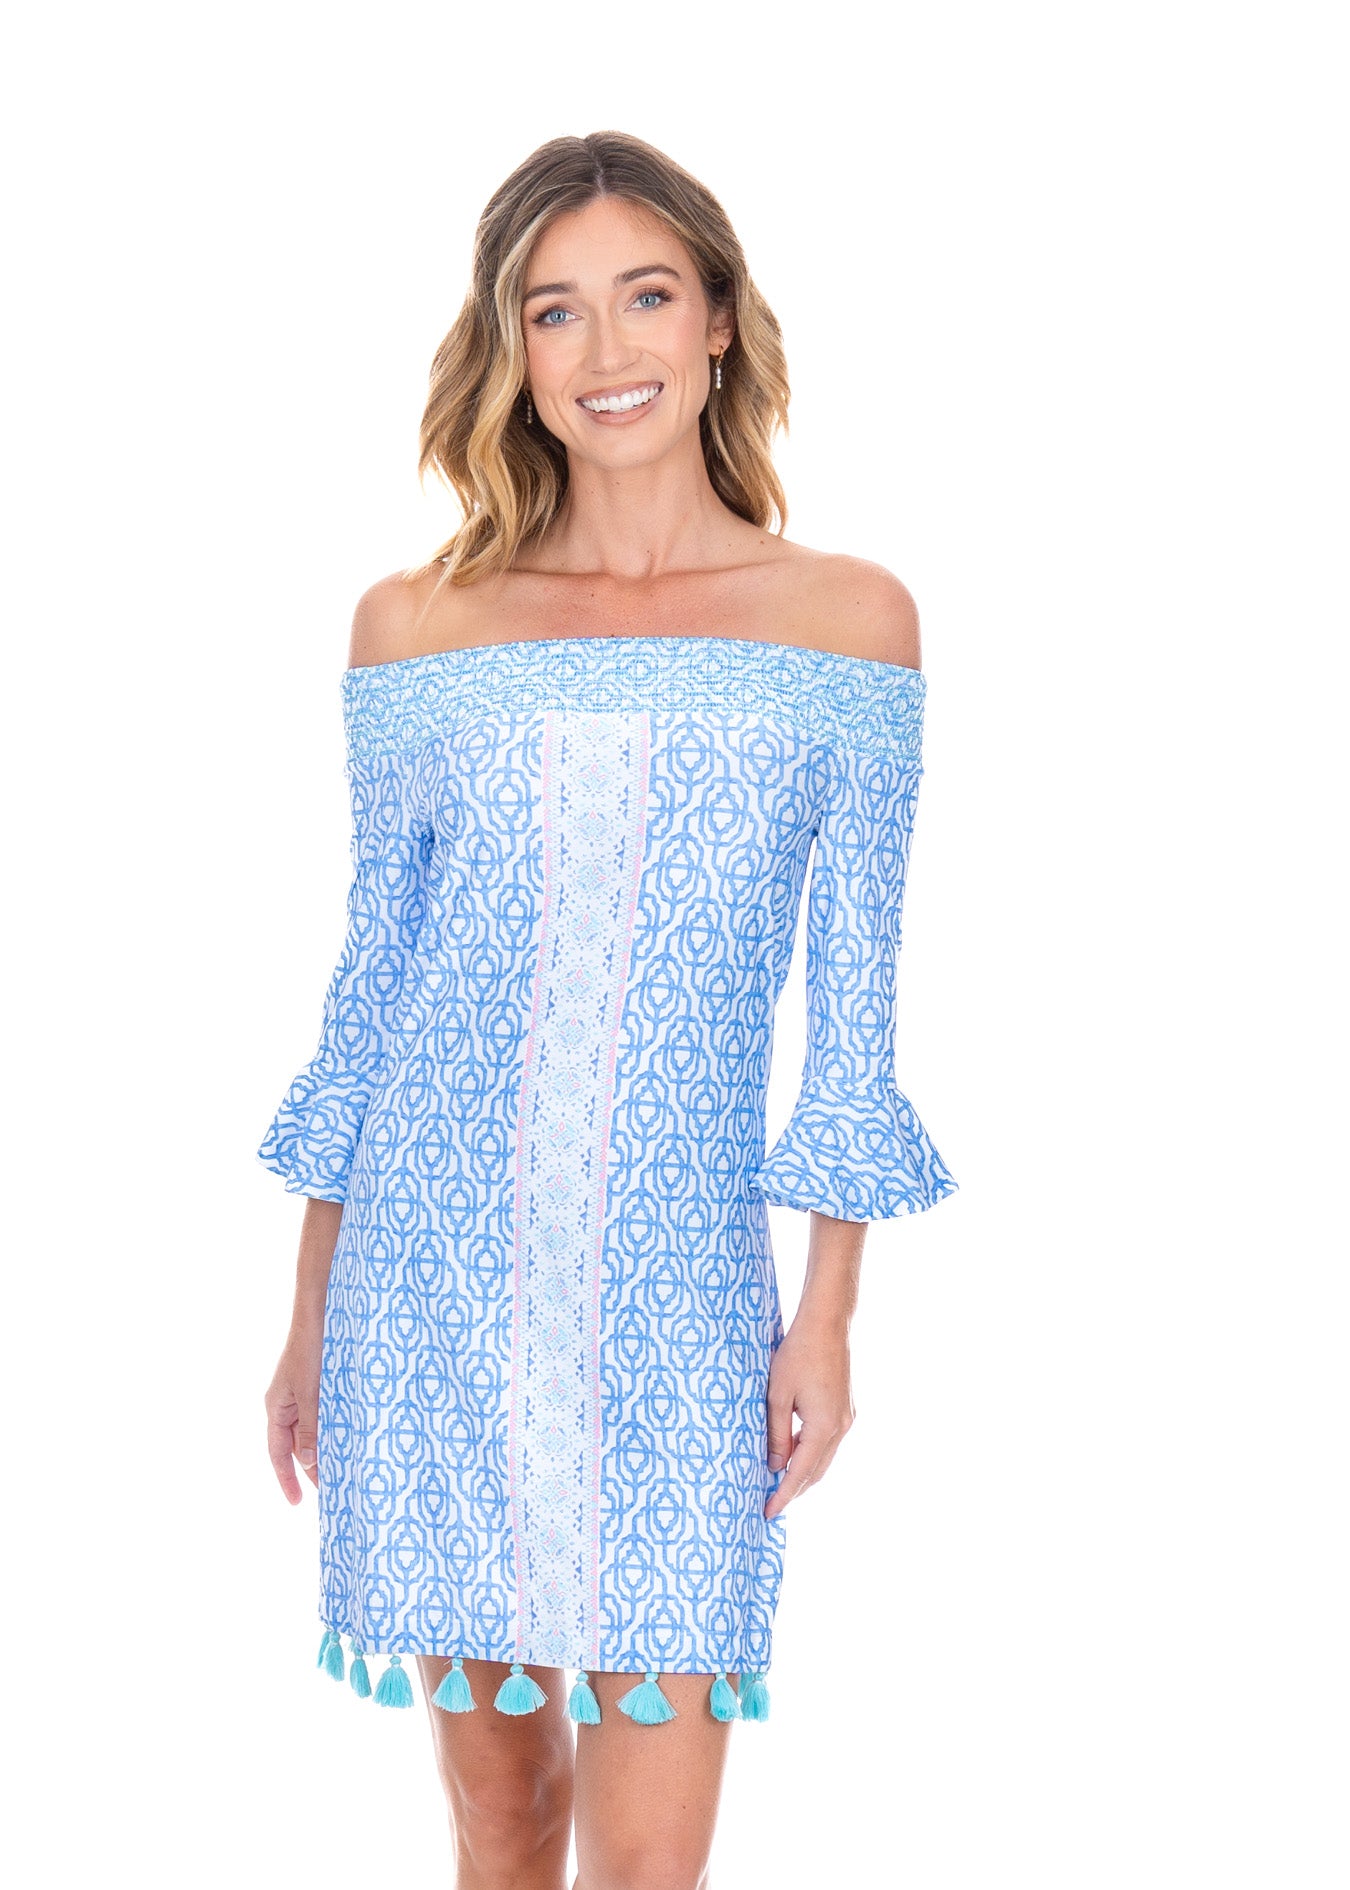 Front facing blonde woman wearing the Lake Como Off the Shoulder Dress. 